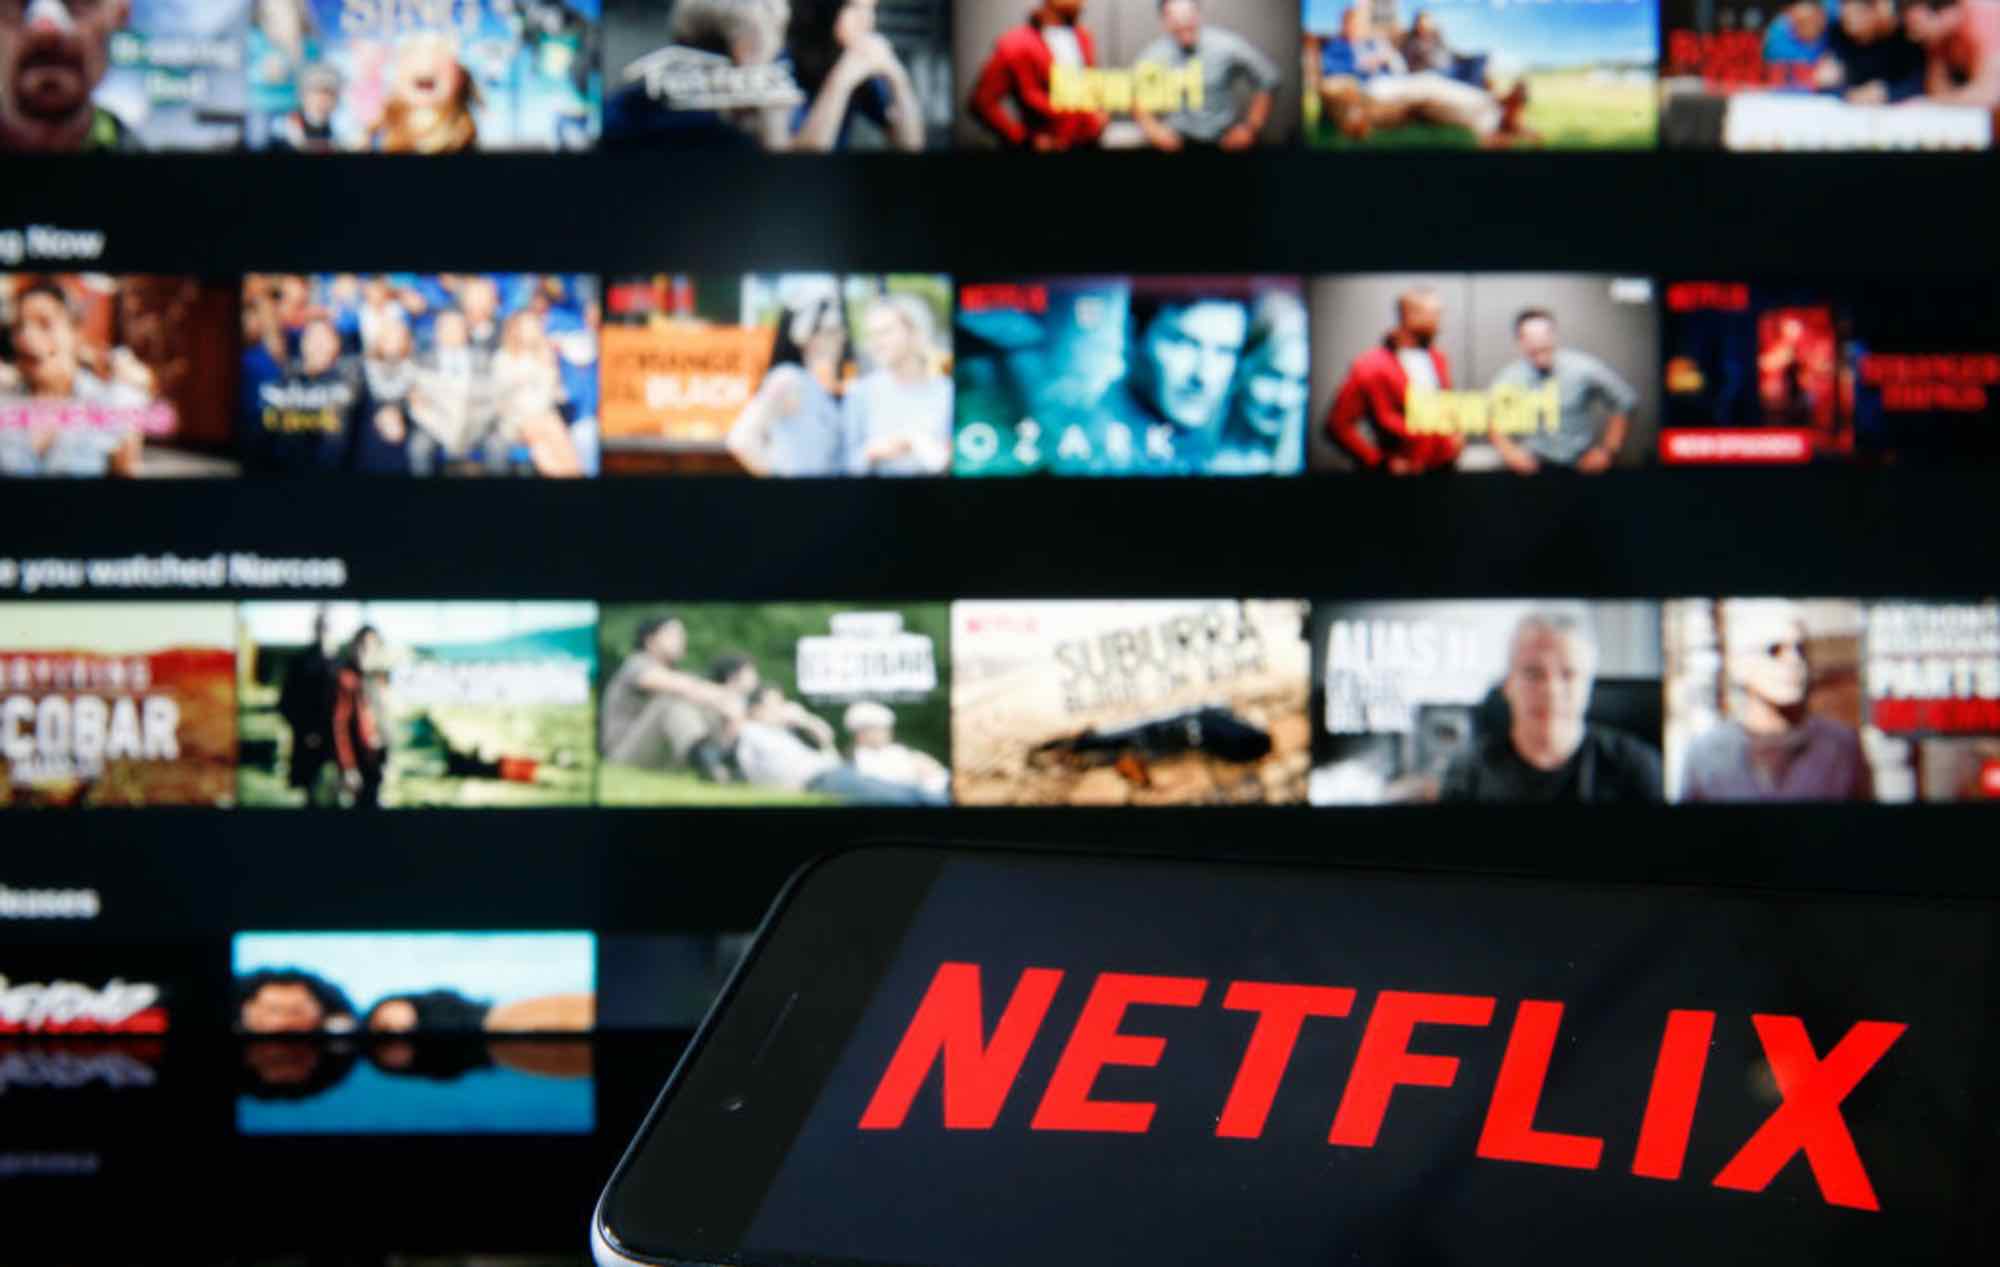 No Netflix free trial? How to get free streaming services in the U.S